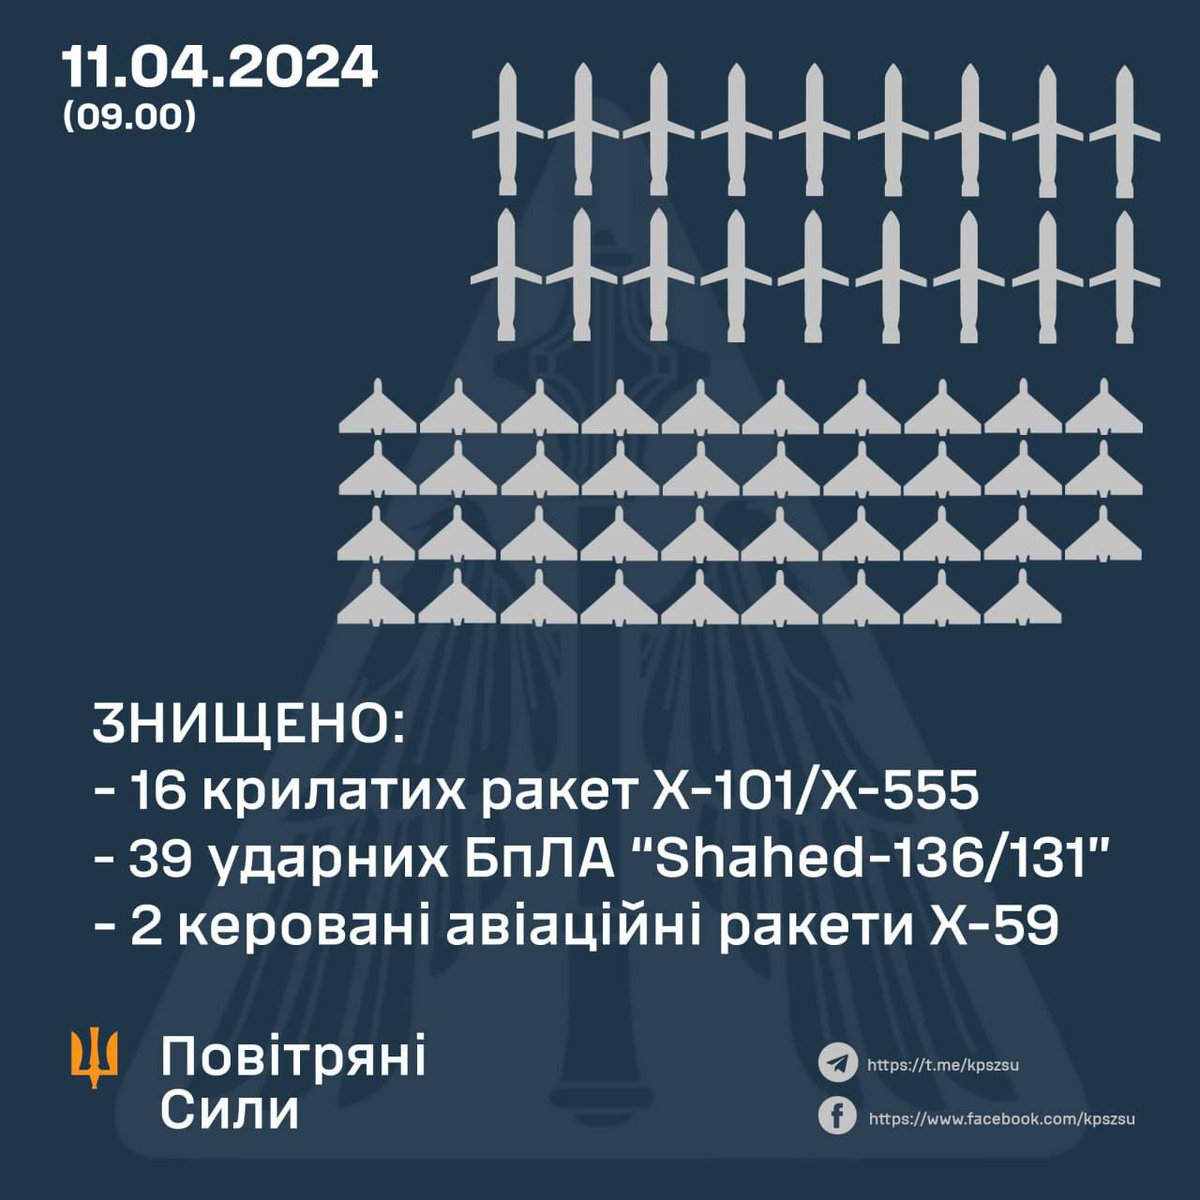 57/82 air targets of the russian missiles and drons were destroyed: 16/20 cruise missiles, 2/4 KAR Kh-59, 39/40 'shaheeds', — the PS report on the work of air defense forces this night. The occupiers also used 6 Kh-47M2 'Kinjal' aeroballistic missiles from MiG-31K fighters and…